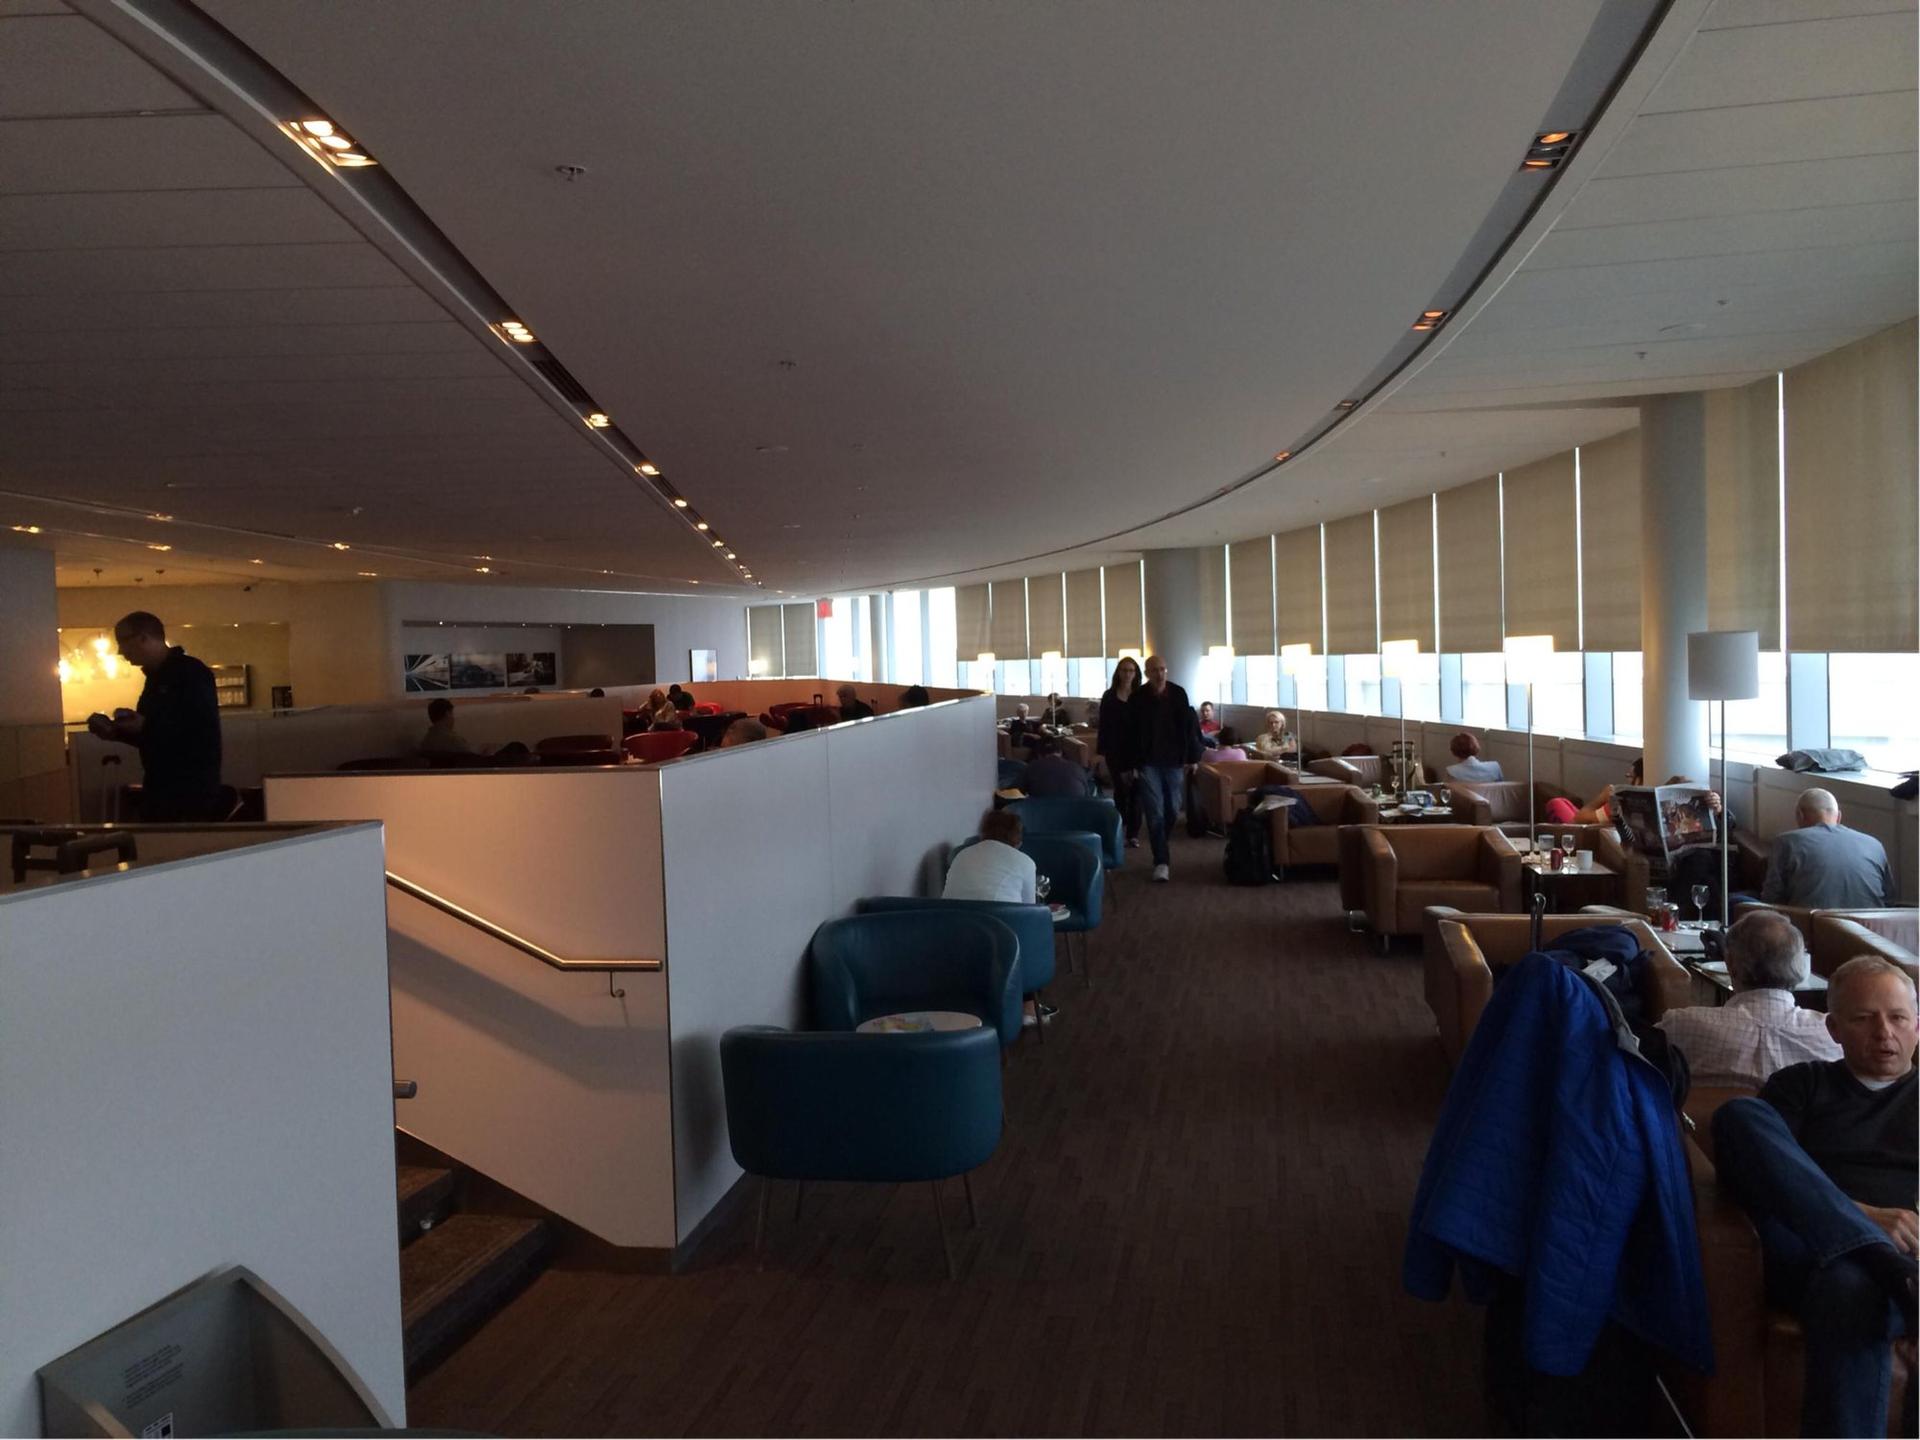 Air Canada Maple Leaf Lounge image 2 of 30